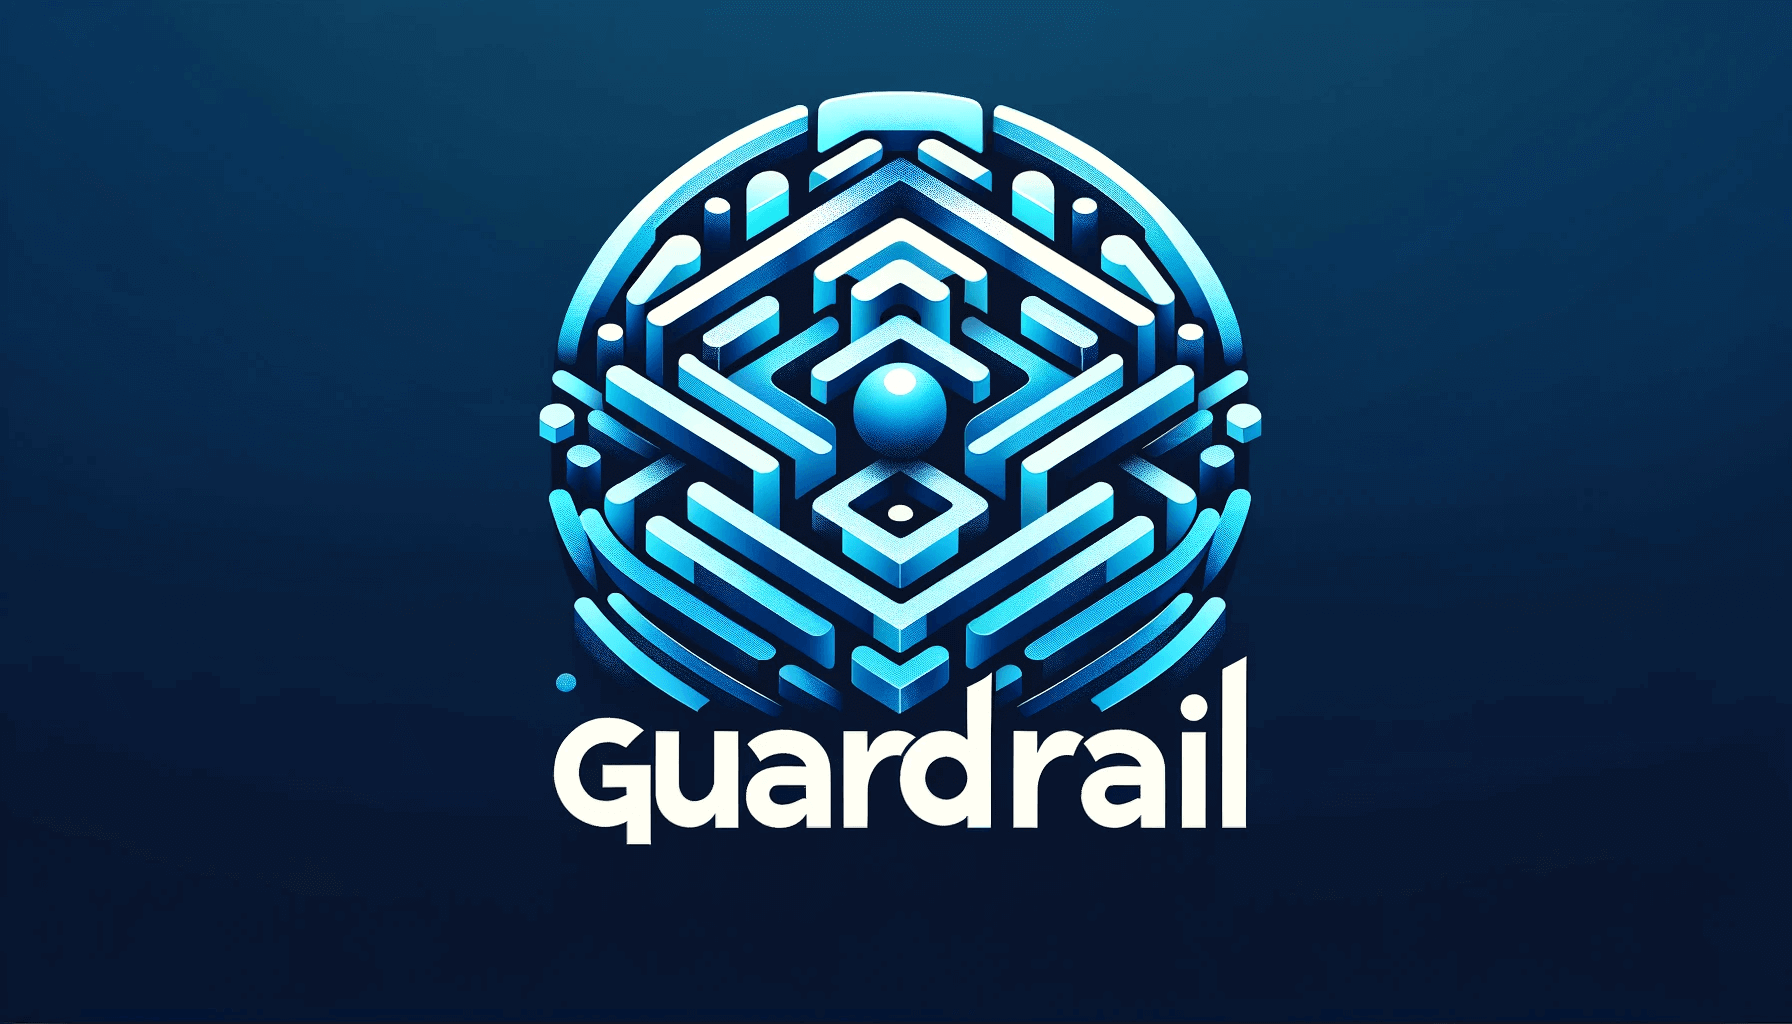 an illustration showing the guardrail logo